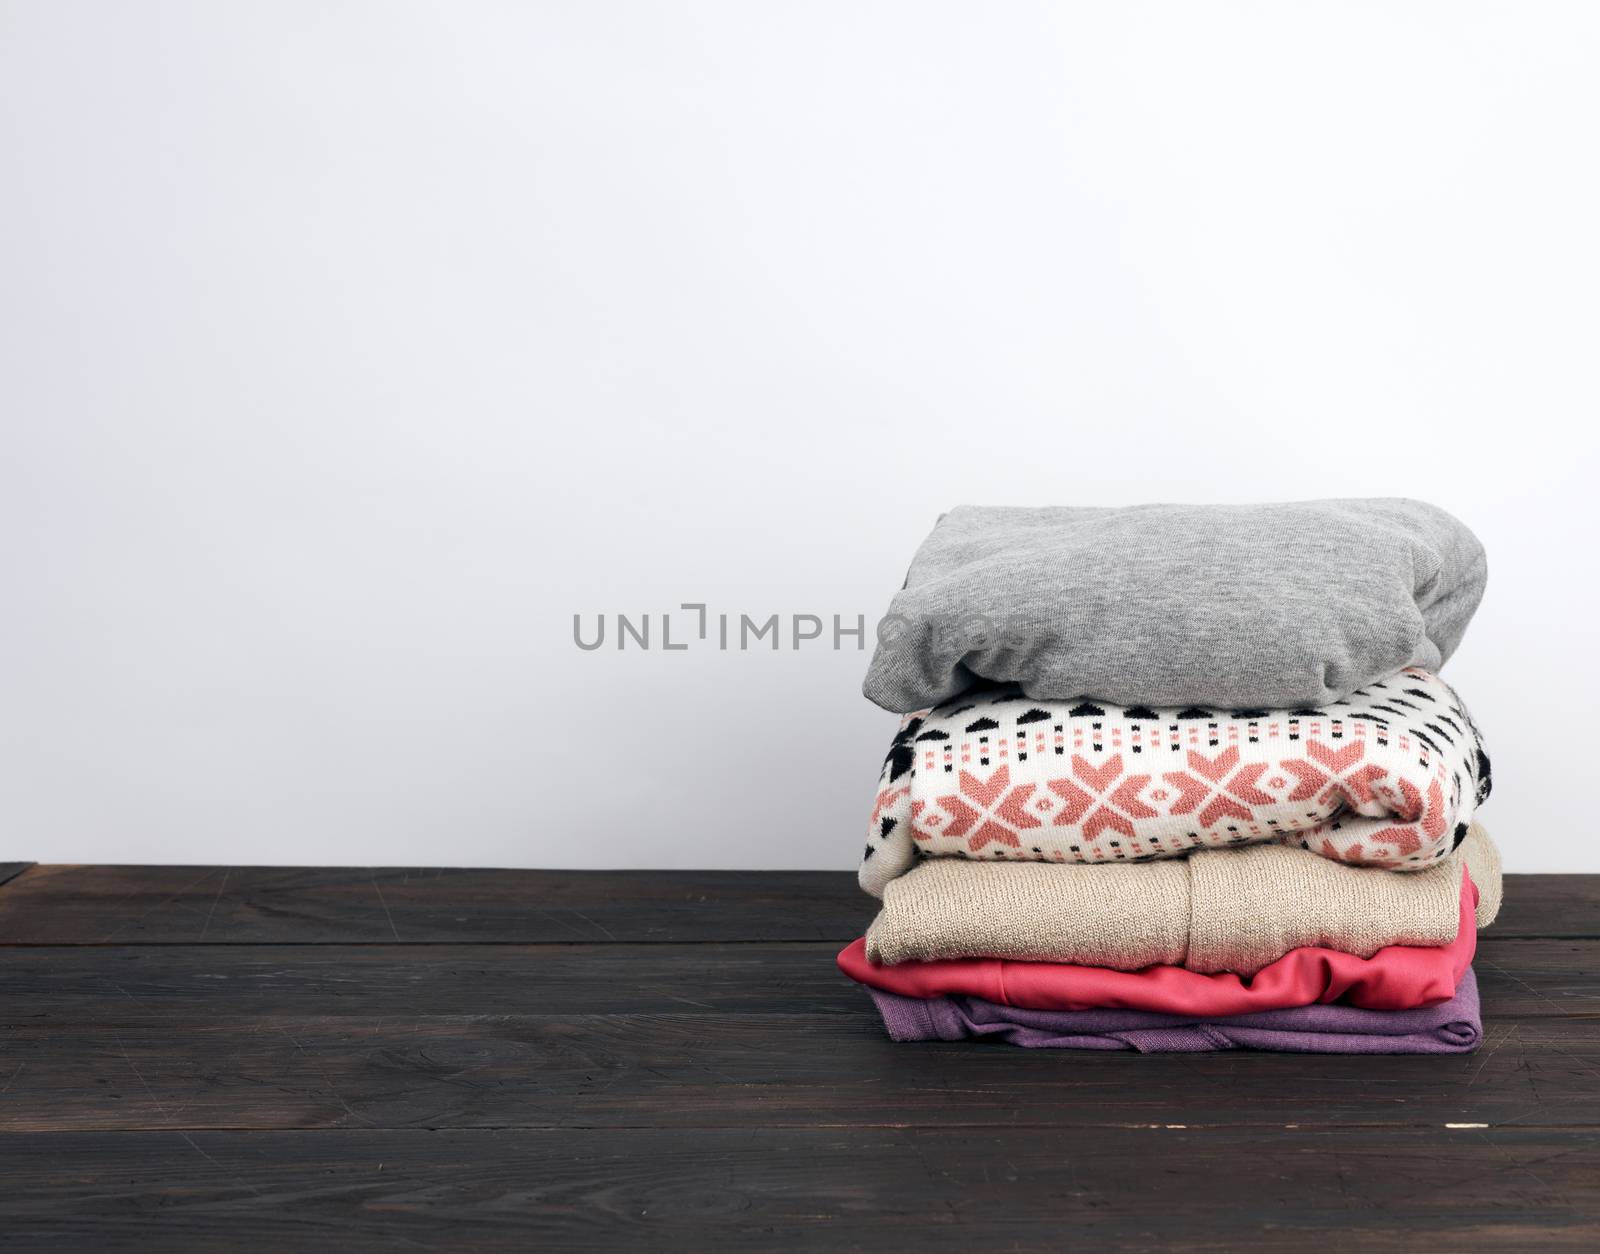 stack of various folded clothes on a wooden table, white background, place for an inscription